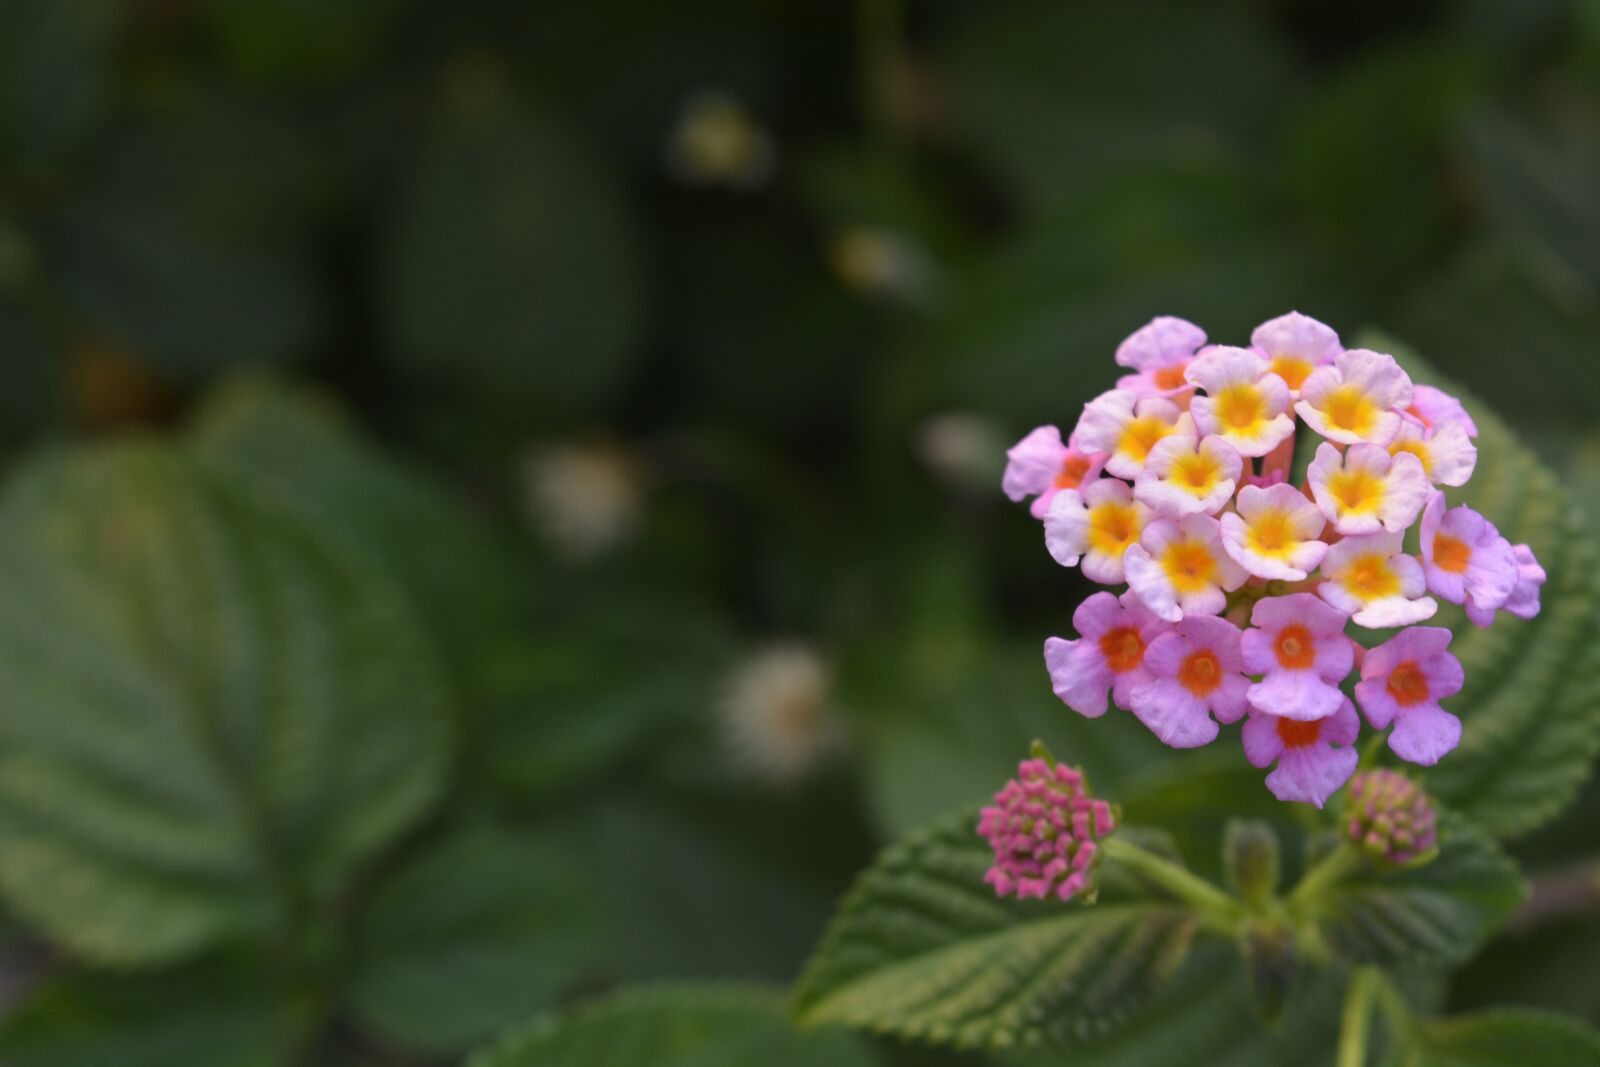 Nikon D5200 sample photo. Flower, small flowers, nature photography